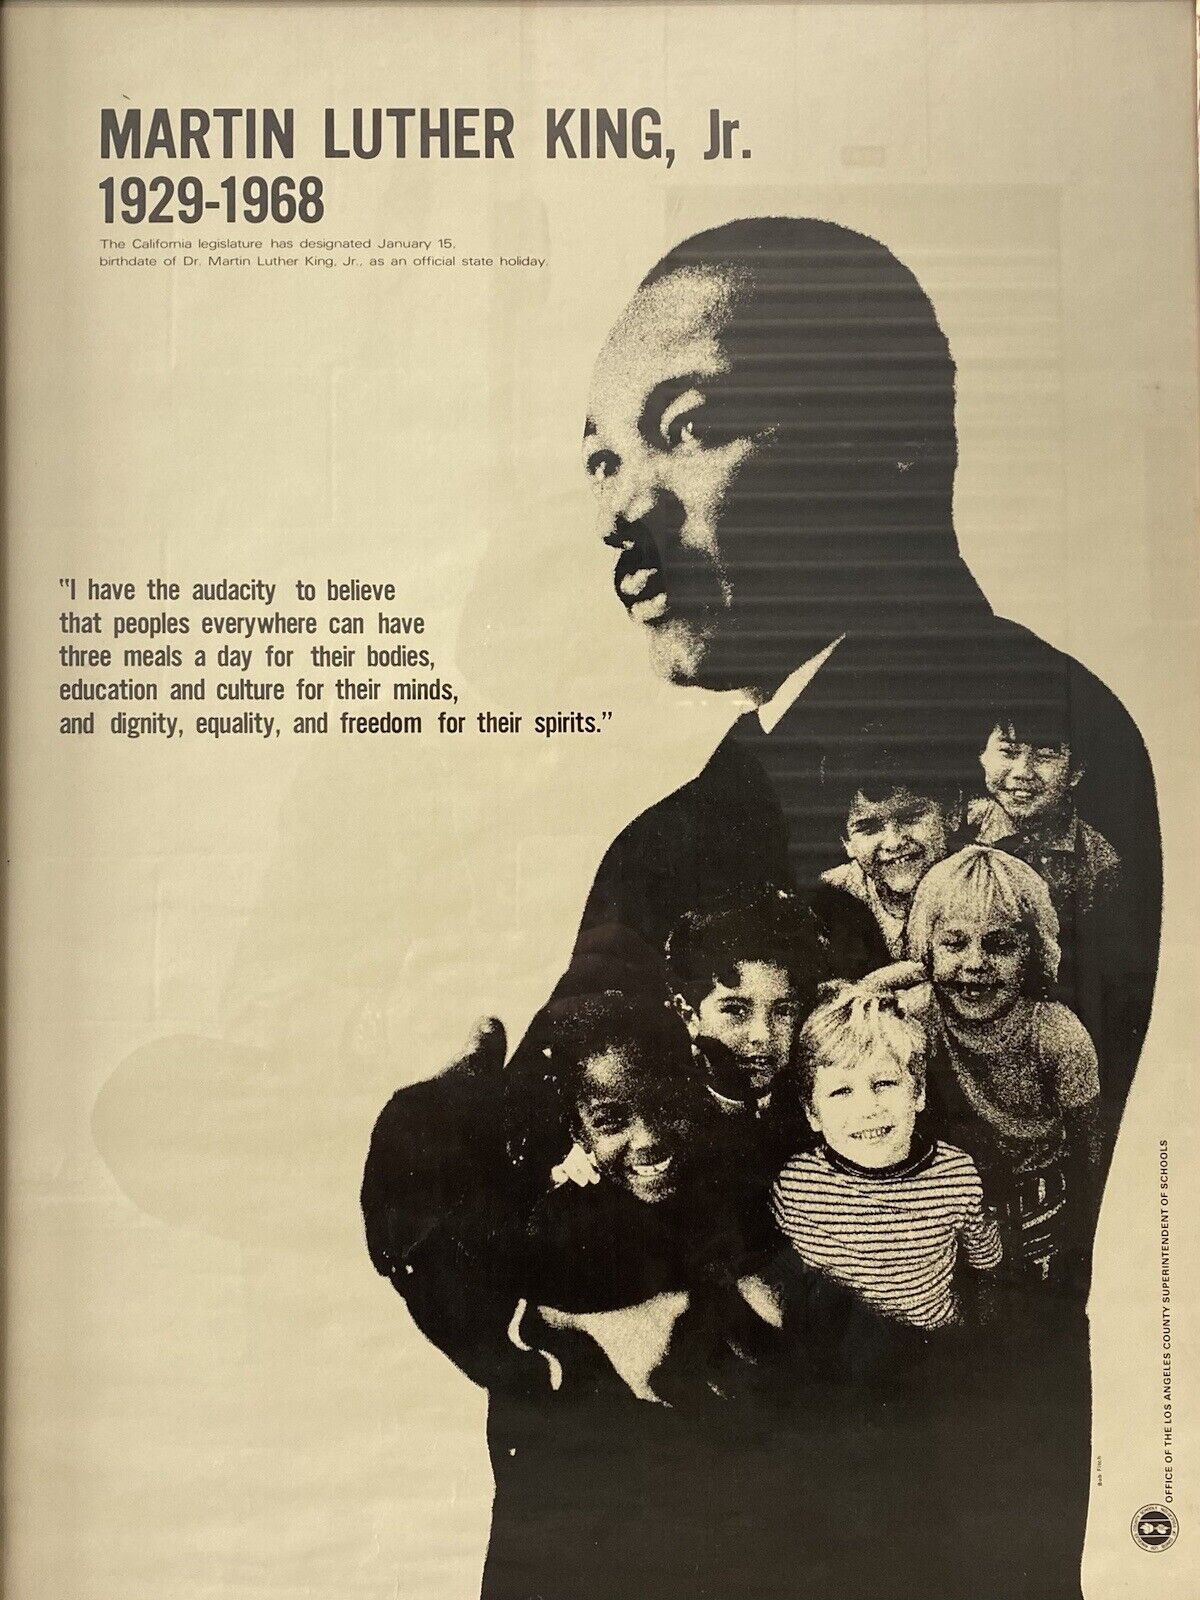 🔥 RARE Historic Vintage Martin Luther King Day Poster, Los Angeles - BOB FITCH